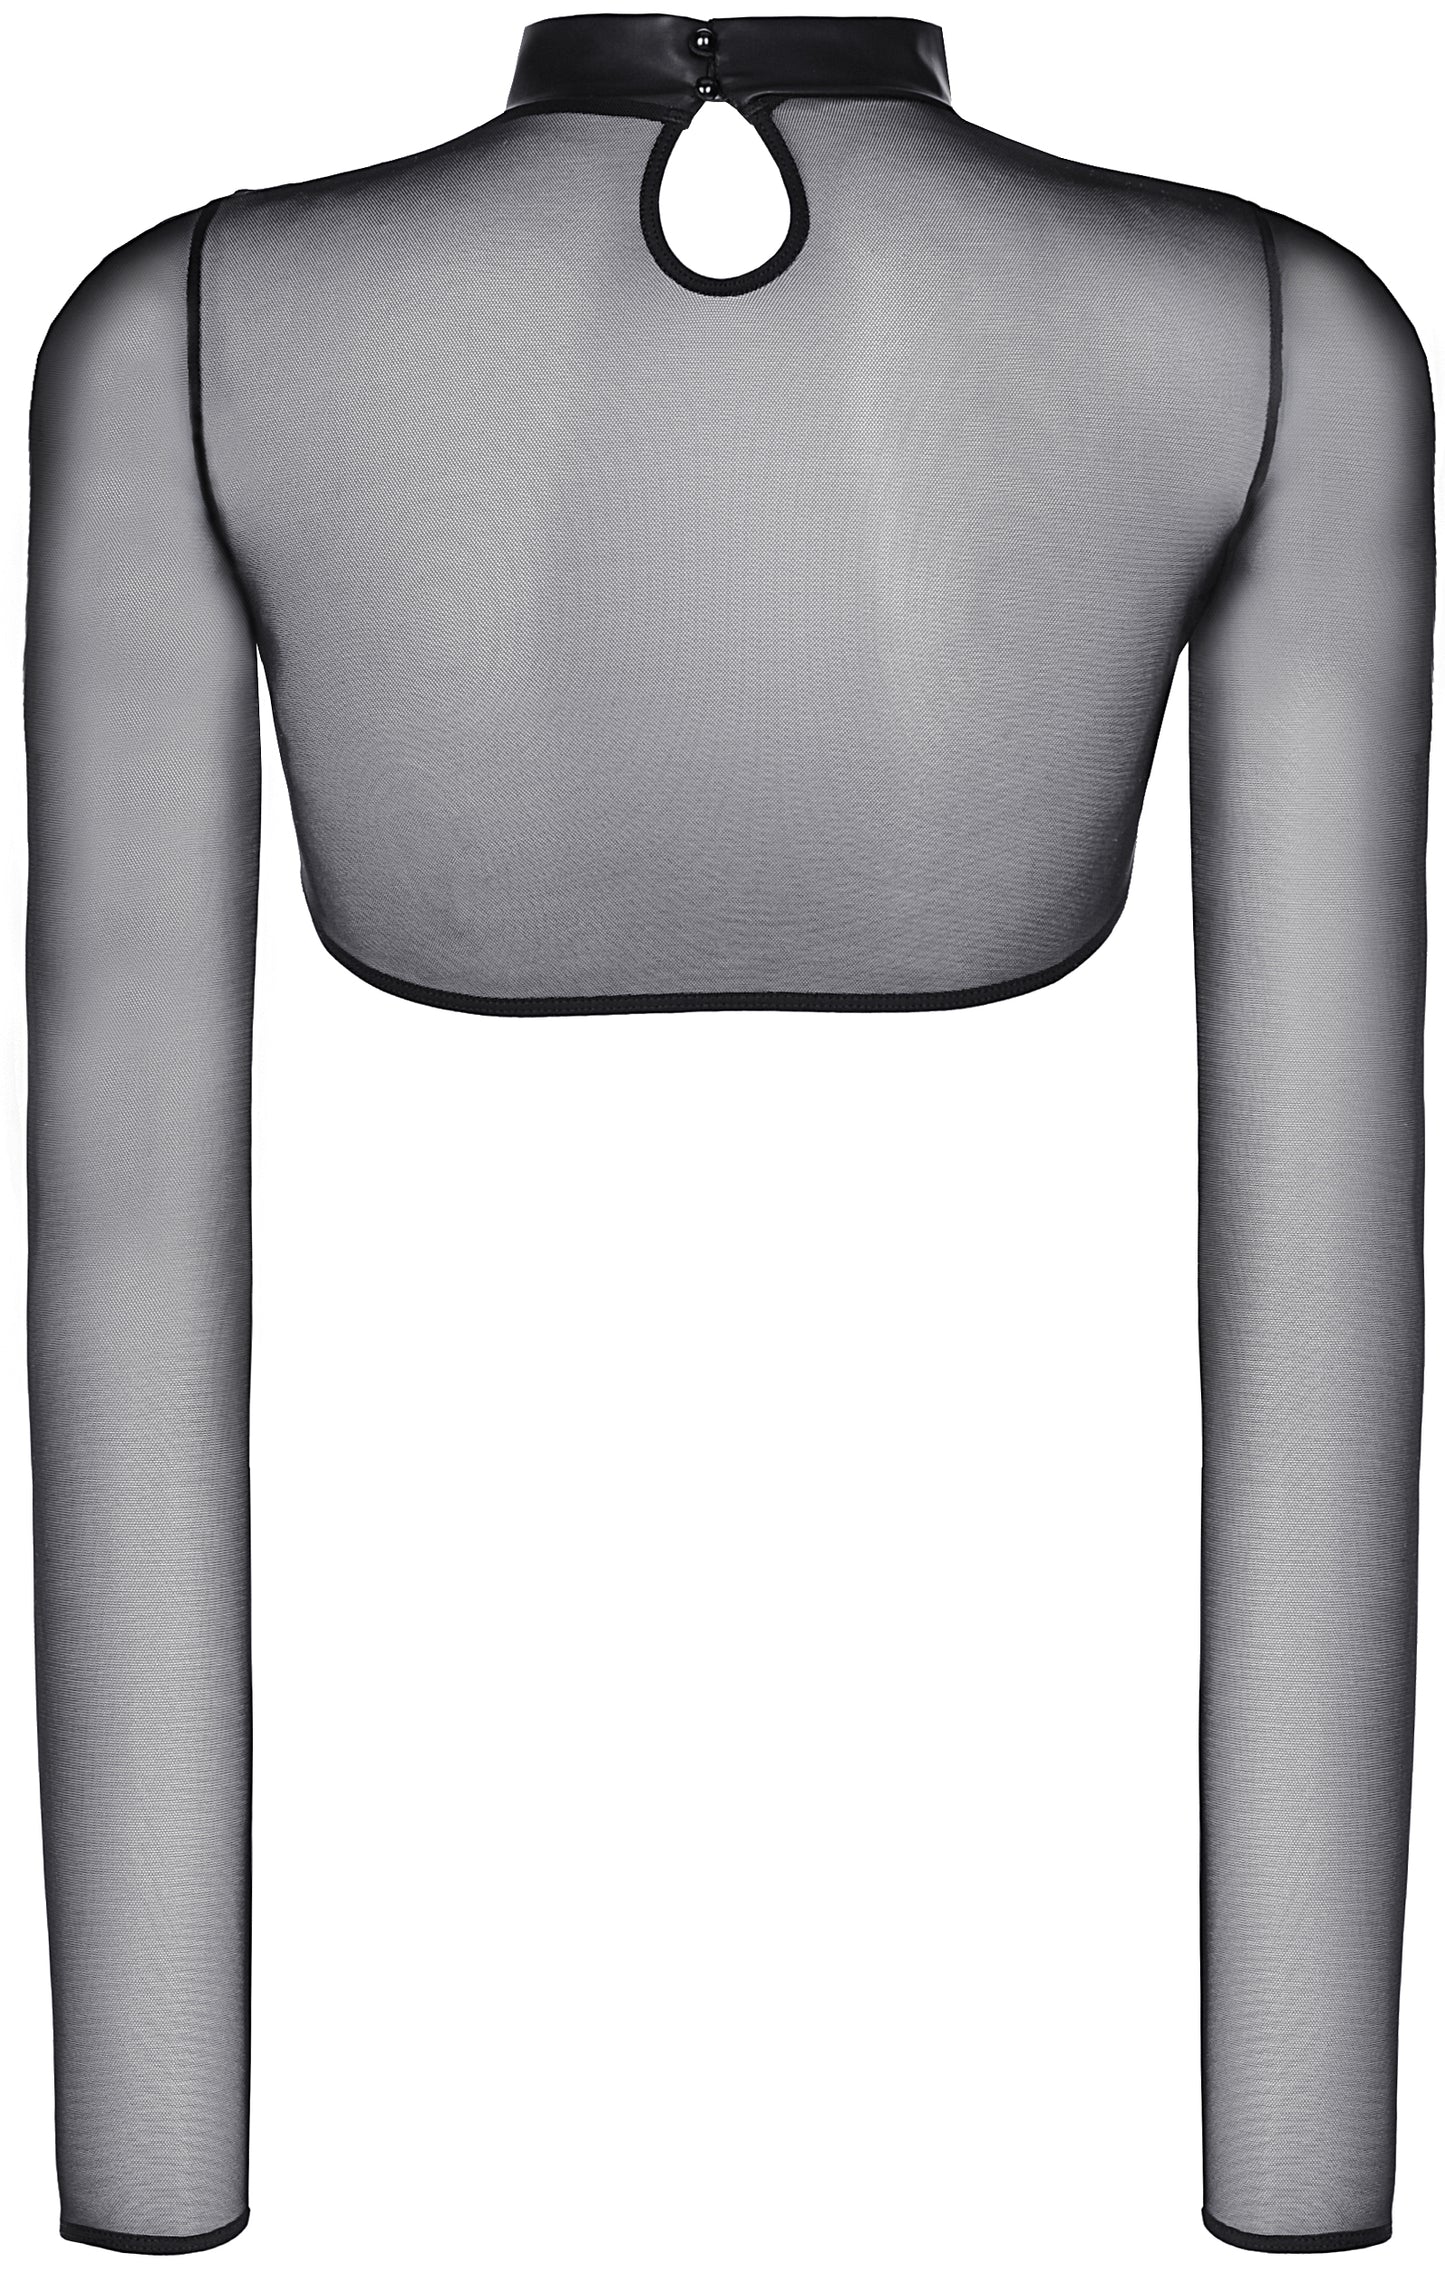 The back of the Mesh Shrug with Wetlook Collar.